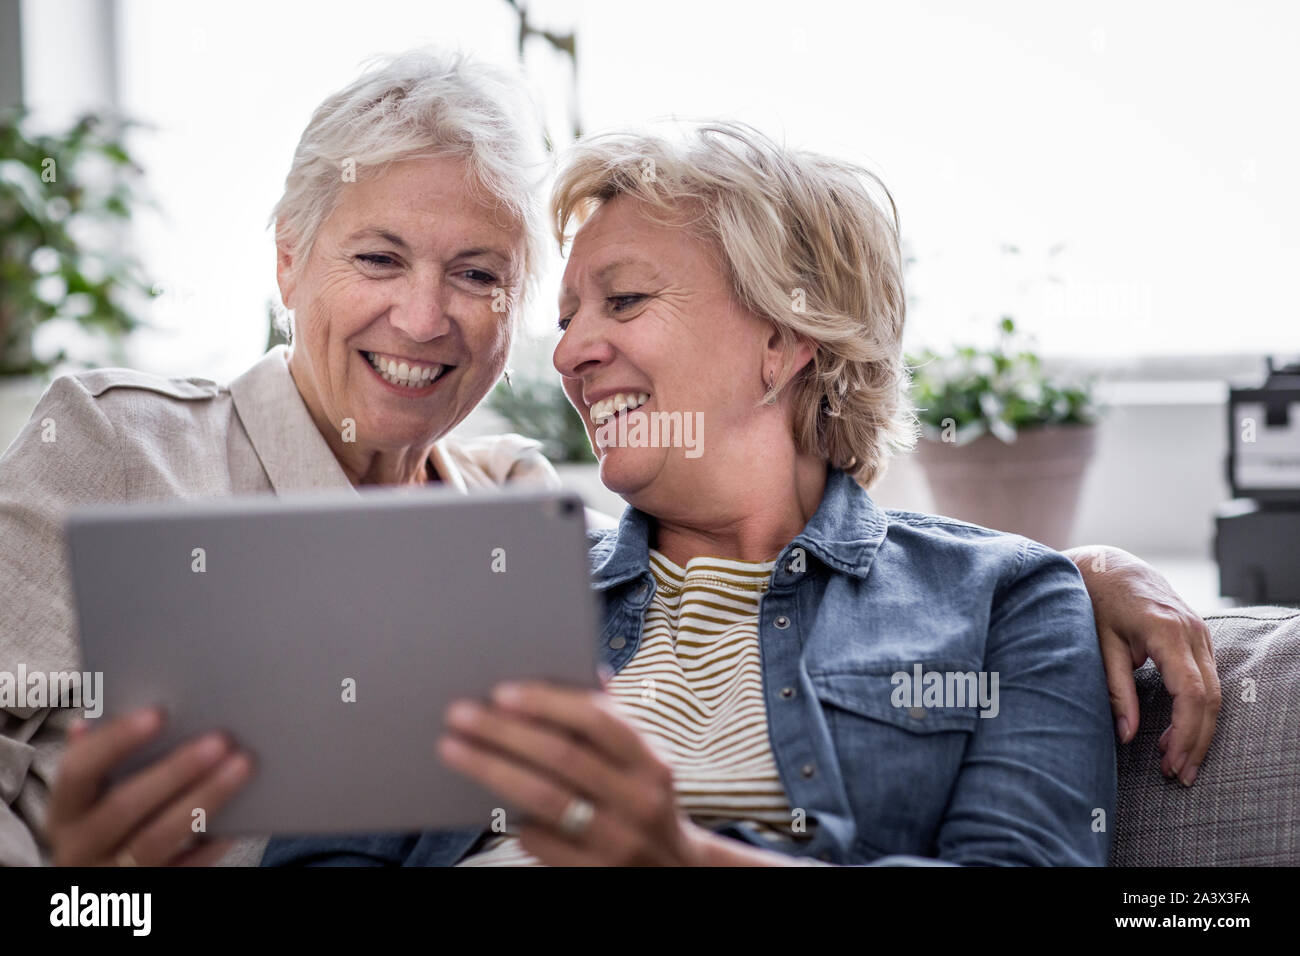 Mature lesbian couple looking at digital tablet together on sofa Stock Photo